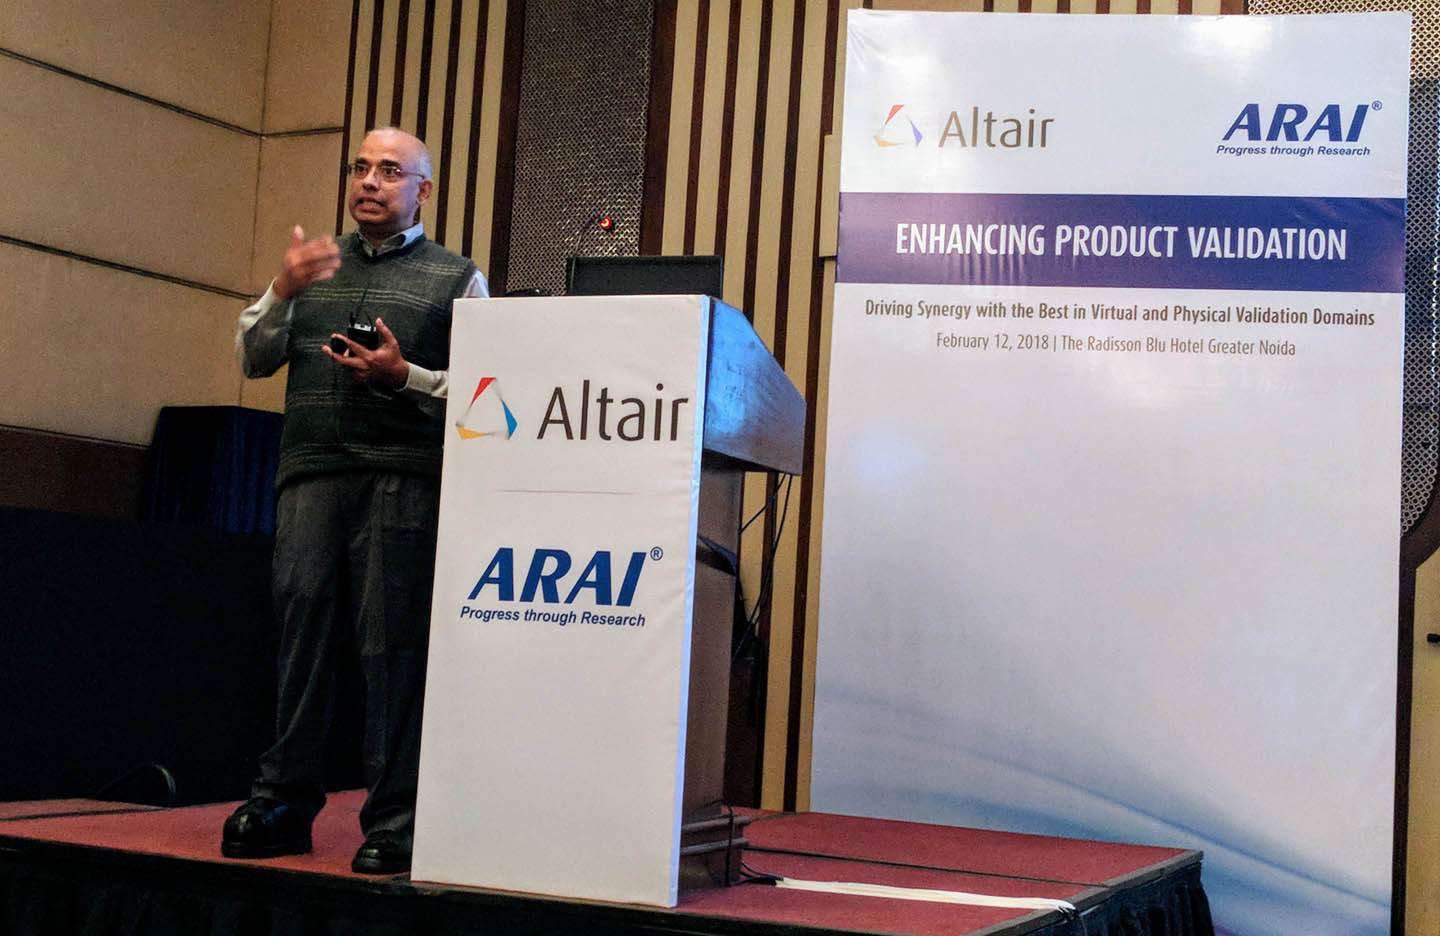 1-r-srikanth-senior-director-altair-engineering-india-tells-that-amidst-rigorous-competition-oes-now-prefer-finite-test-cycles-over-infinite-ones